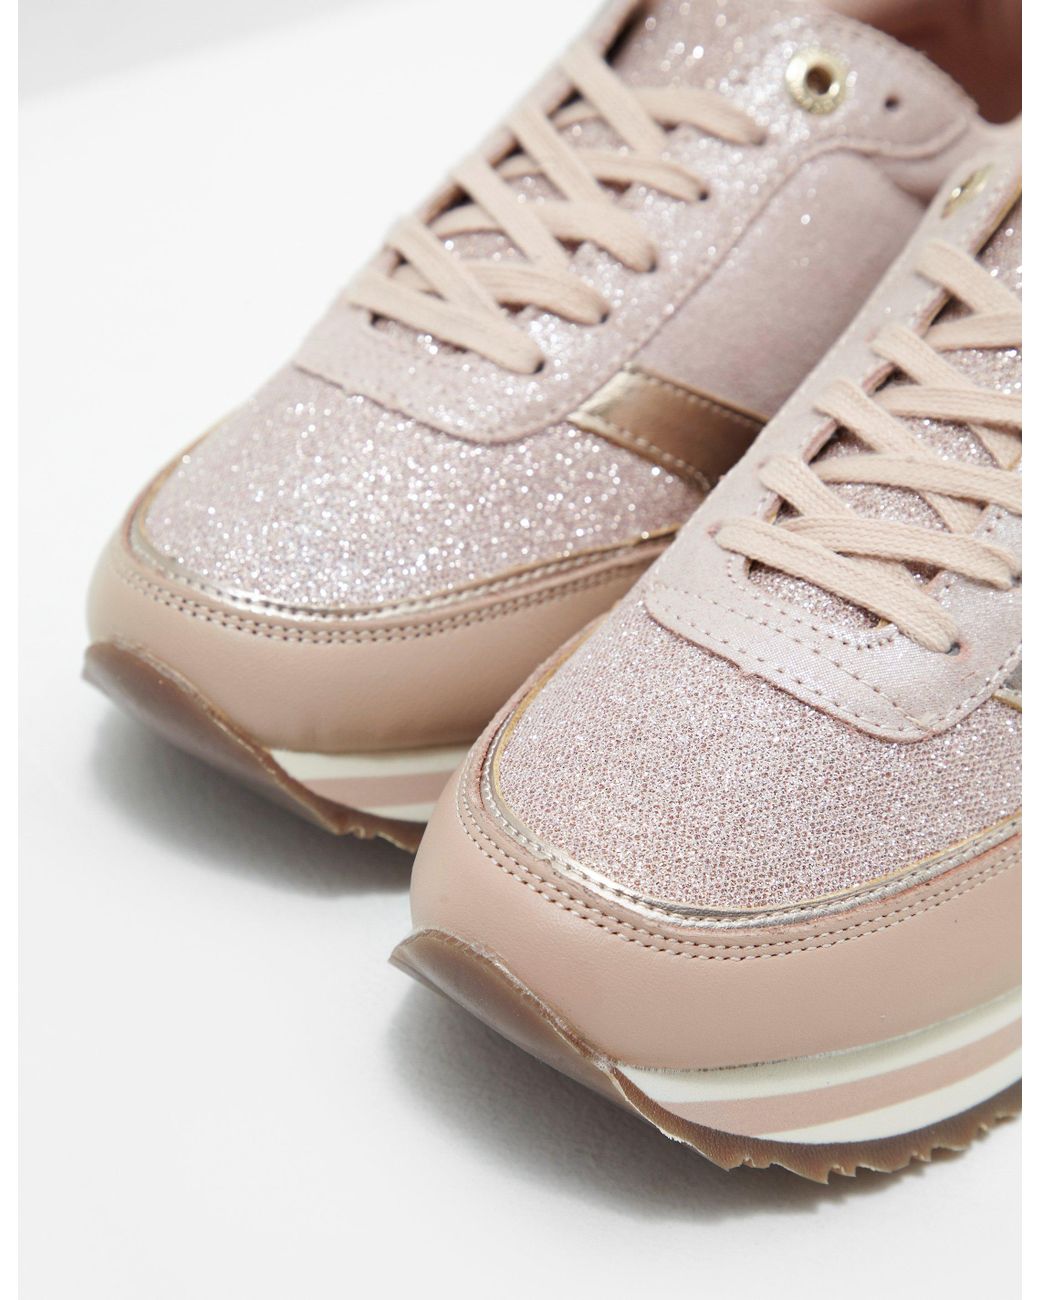 Tommy Hilfiger Leather Metallic Retro Trainers Pink | Lyst